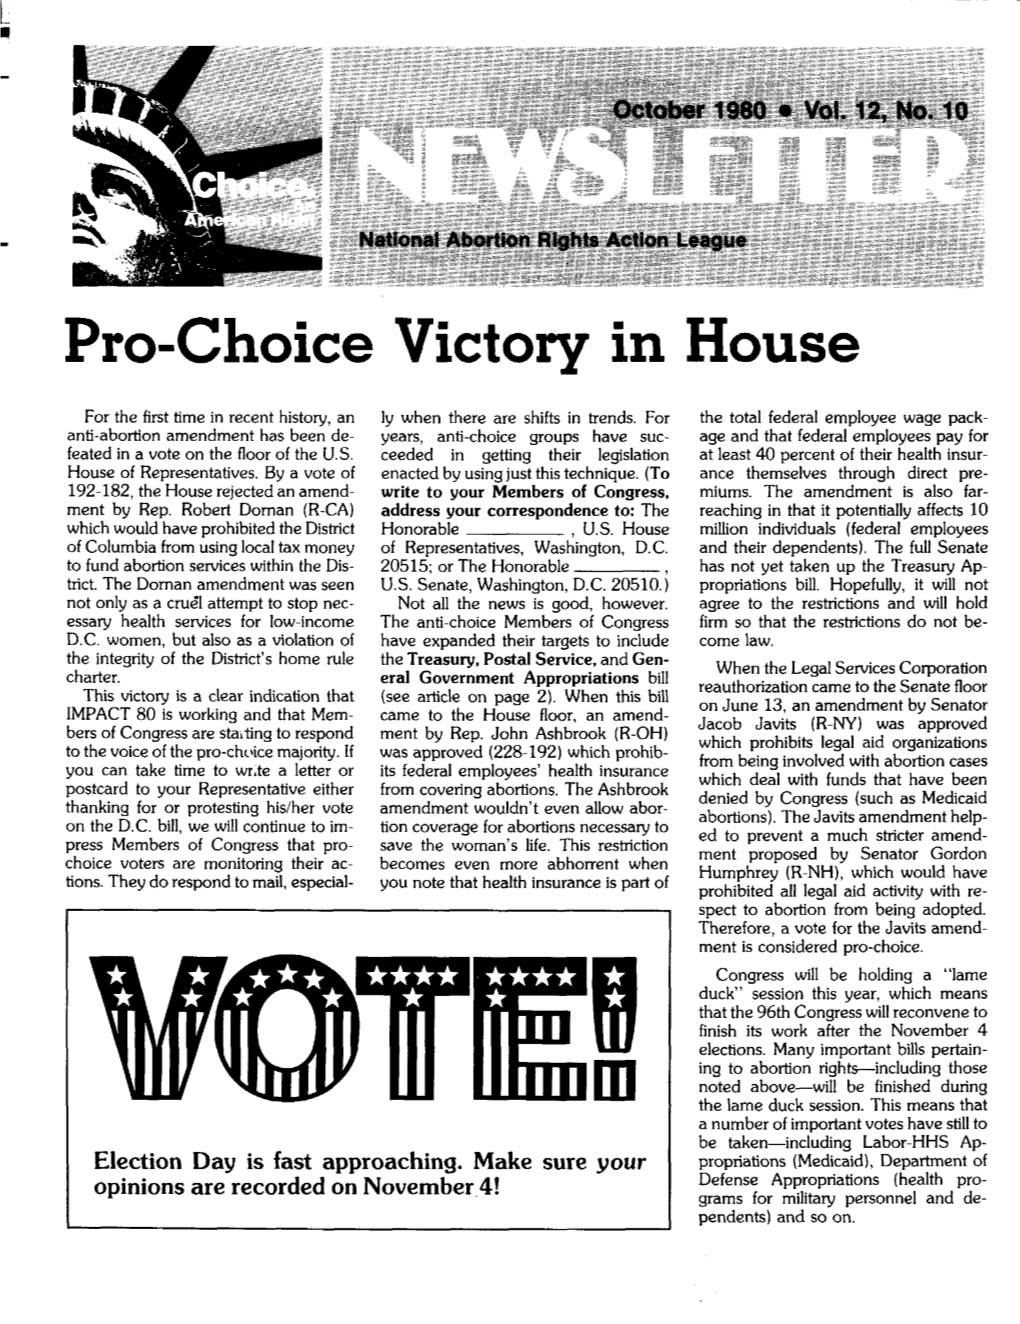 Pro-Choice Victory in House